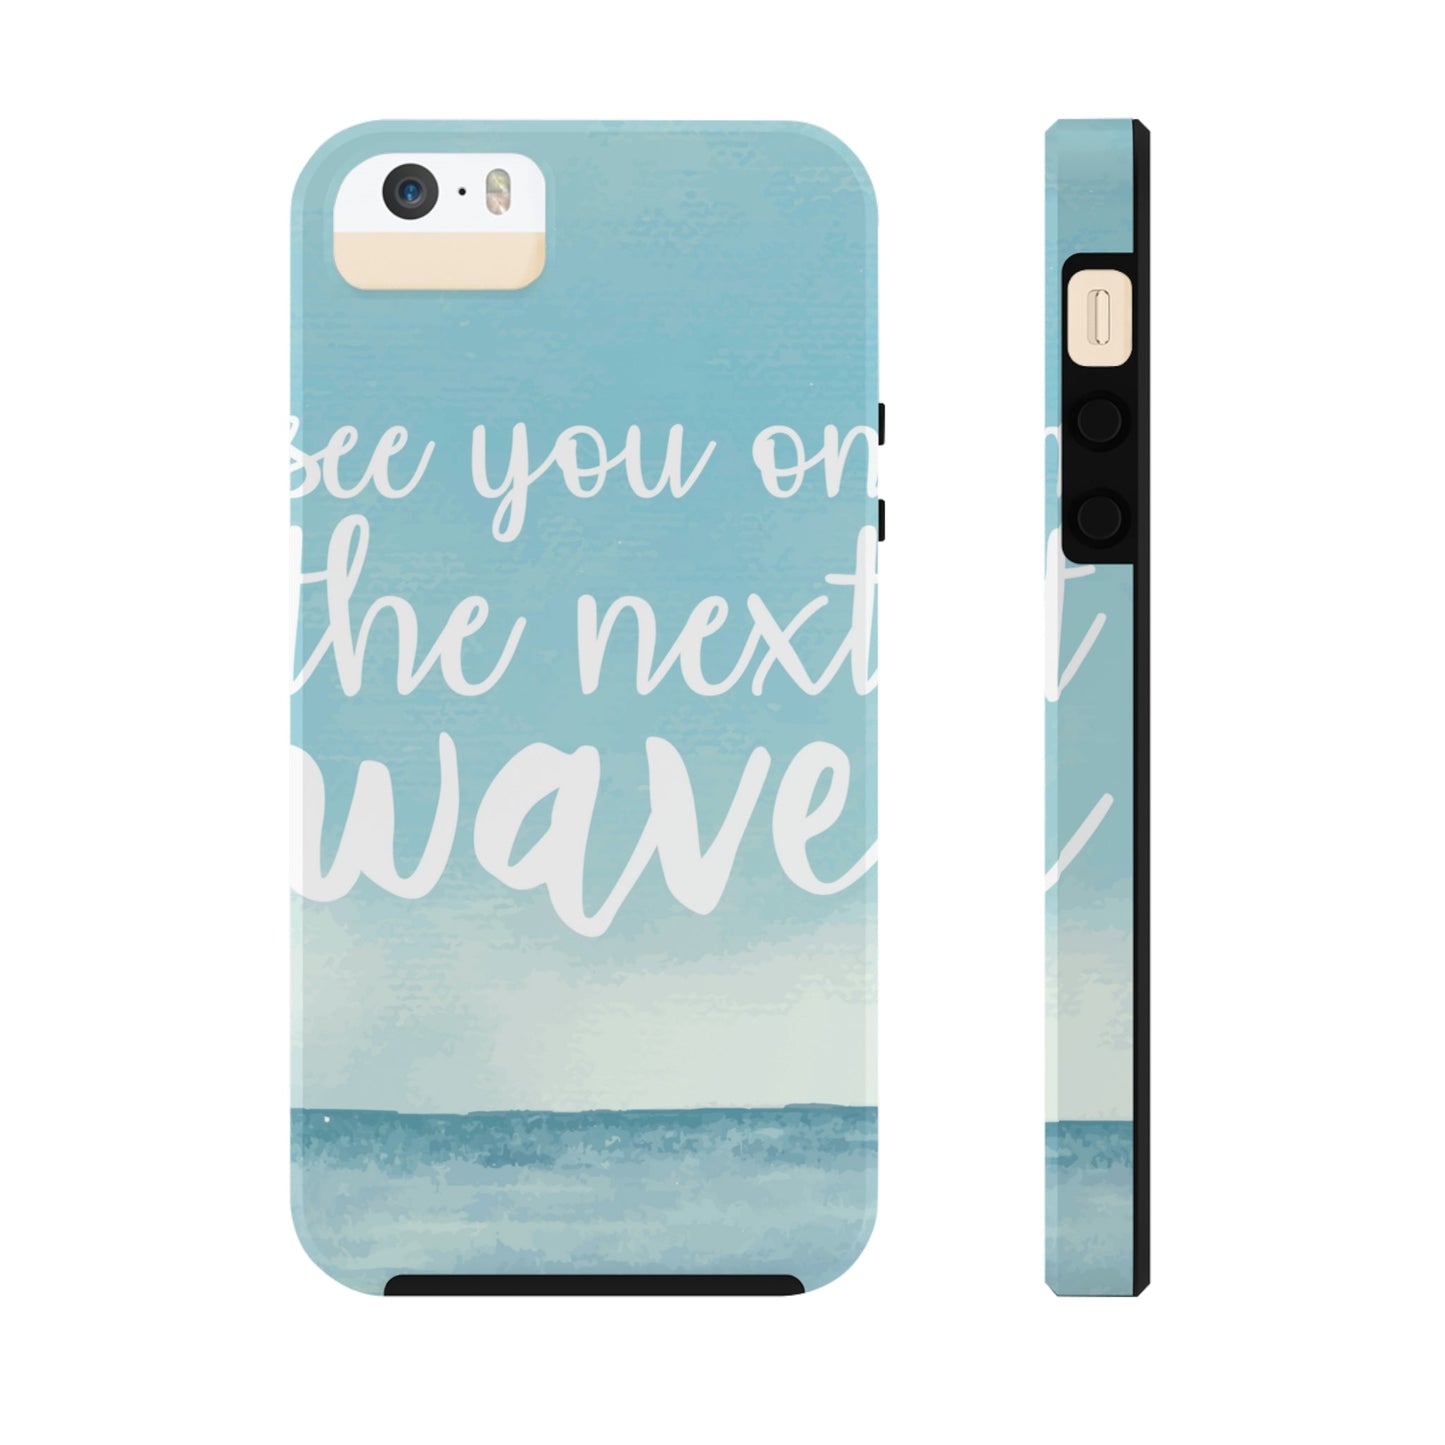 See You On the Next Wave Surfers Slogan Tough Phone Cases Case-Mate Ichaku [Perfect Gifts Selection]